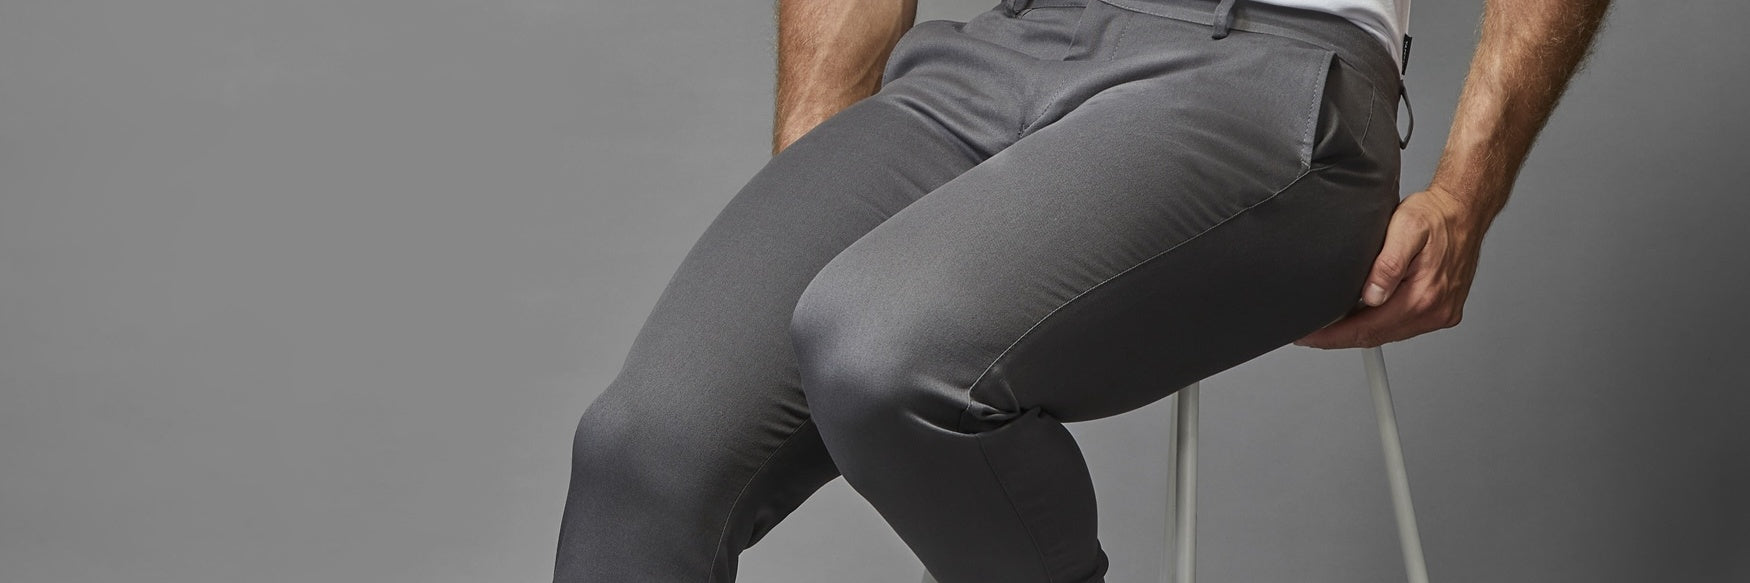 Yours Clothing STRETCH - Leggings - Trousers - charcoal/grey